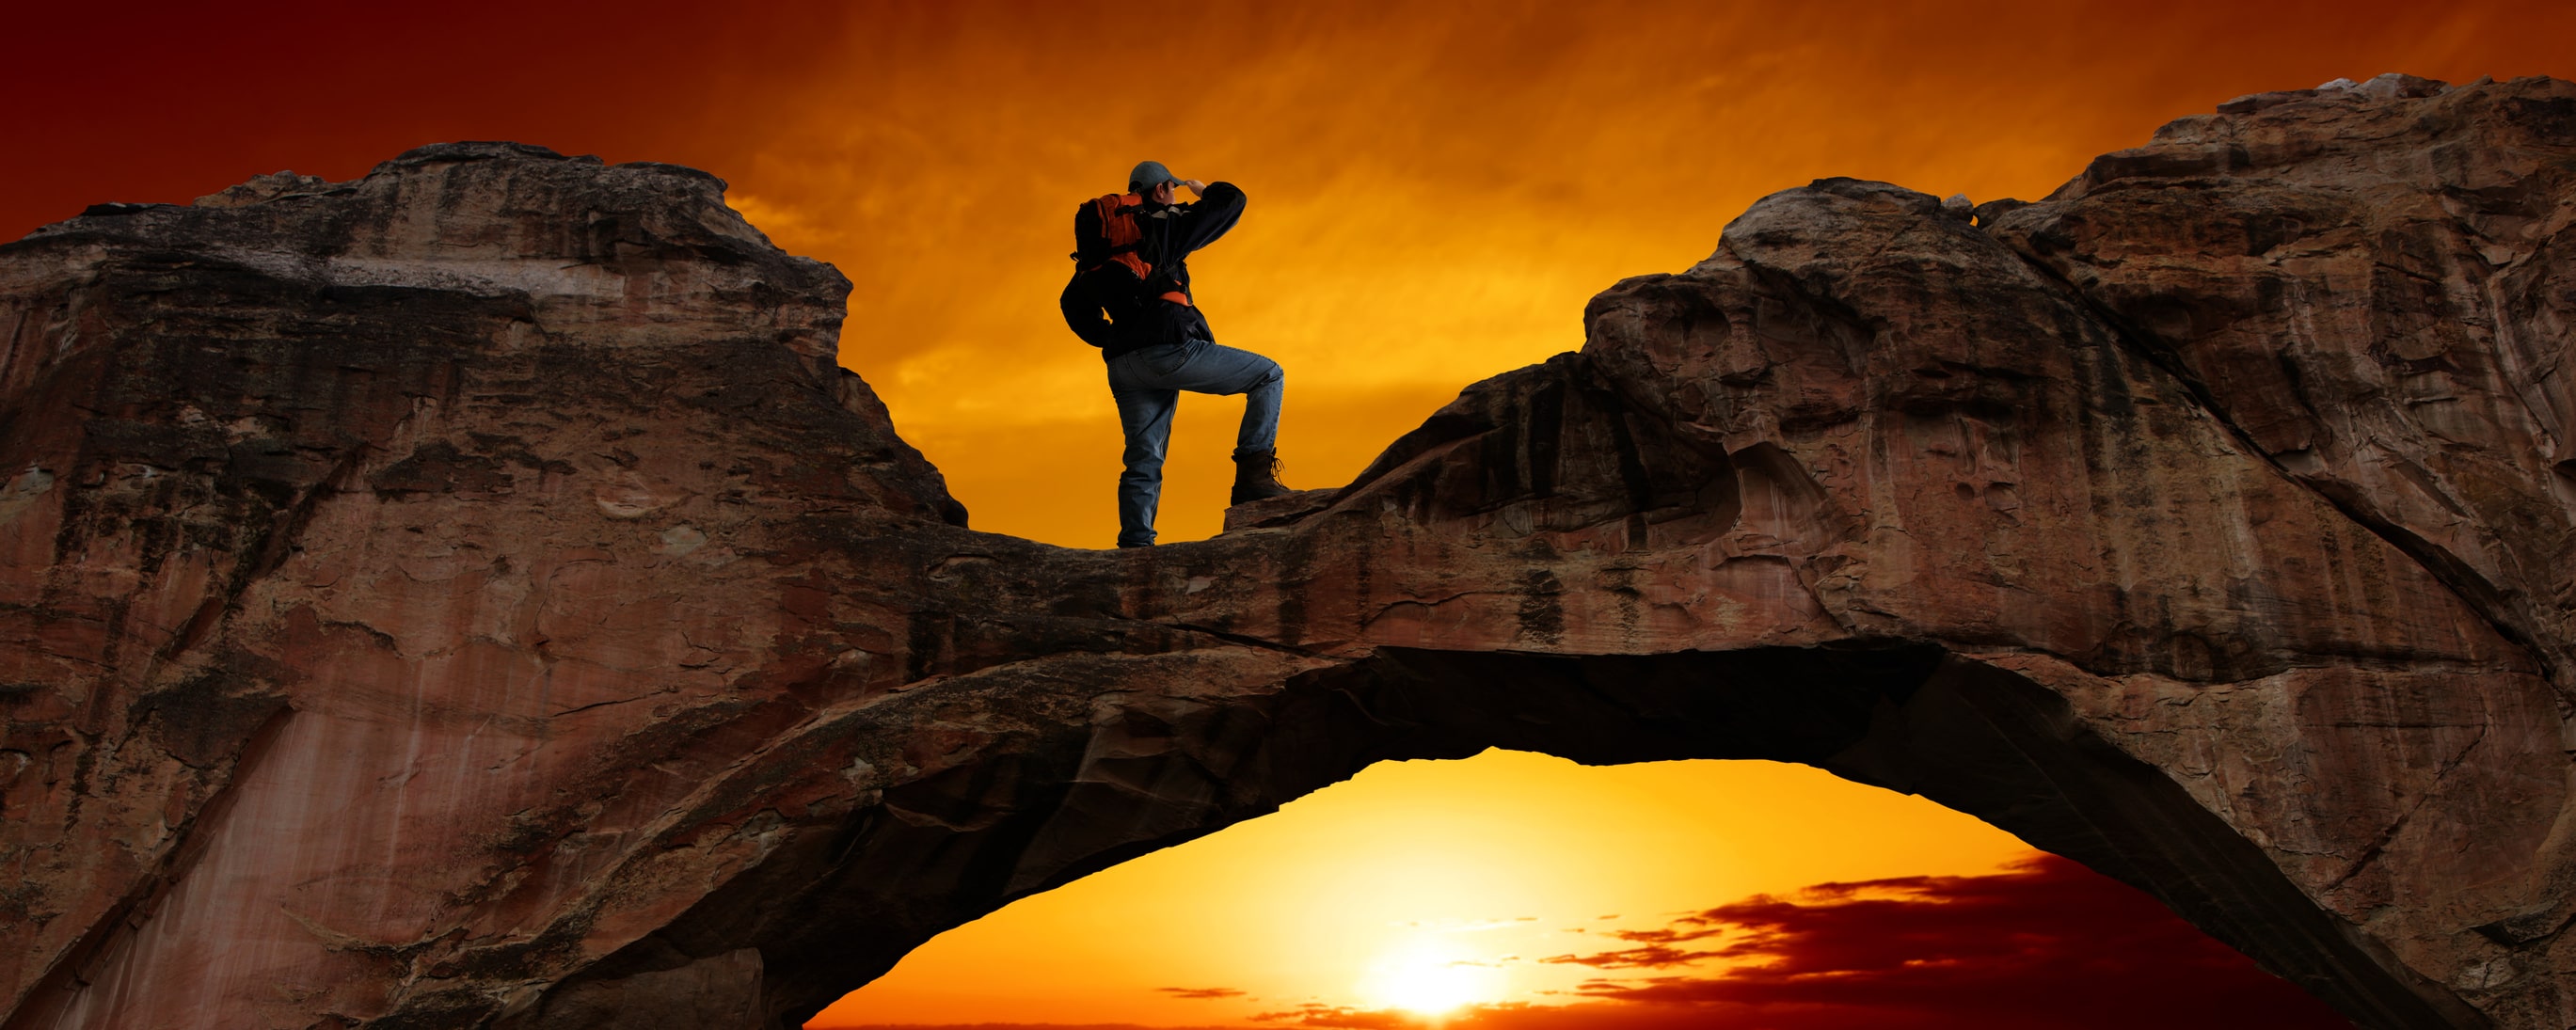 male hiker taking pictures from atop the center of a large rock formation in arizona desert at sunset, where round cut-out formed in rock